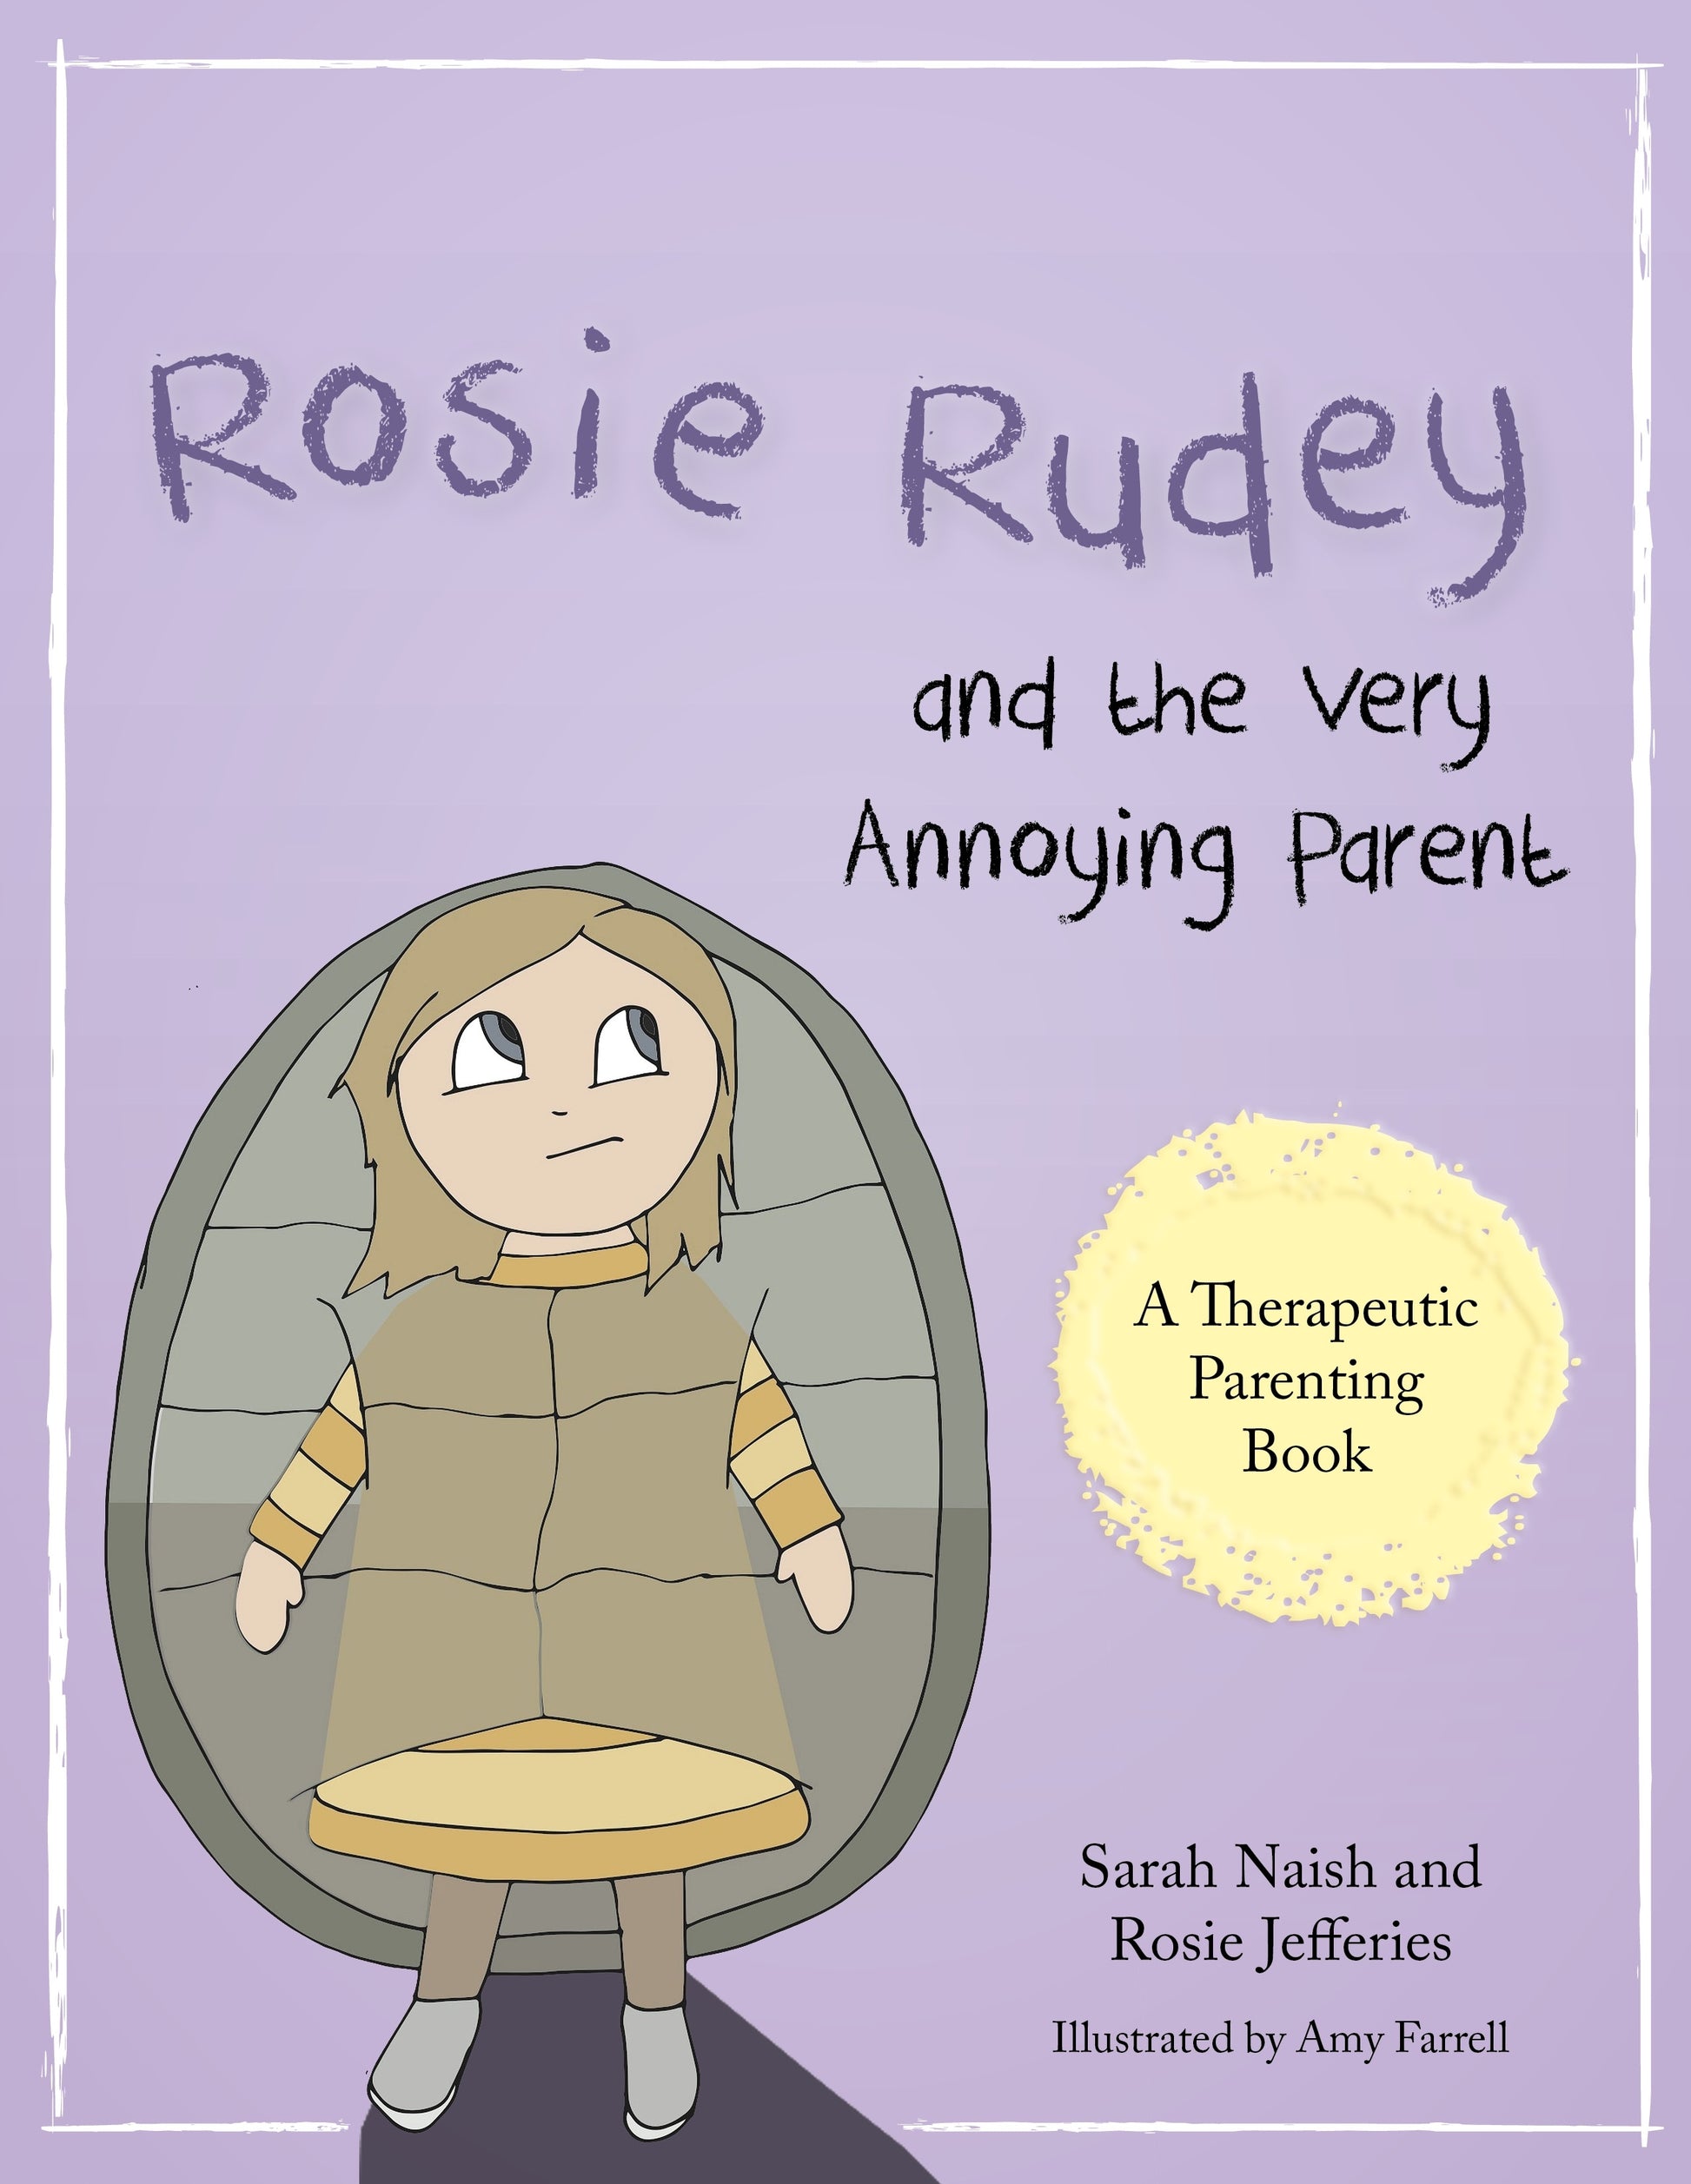 Rosie Rudey and the Very Annoying Parent by Sarah Naish, Rosie Jefferies, Amy Farrell